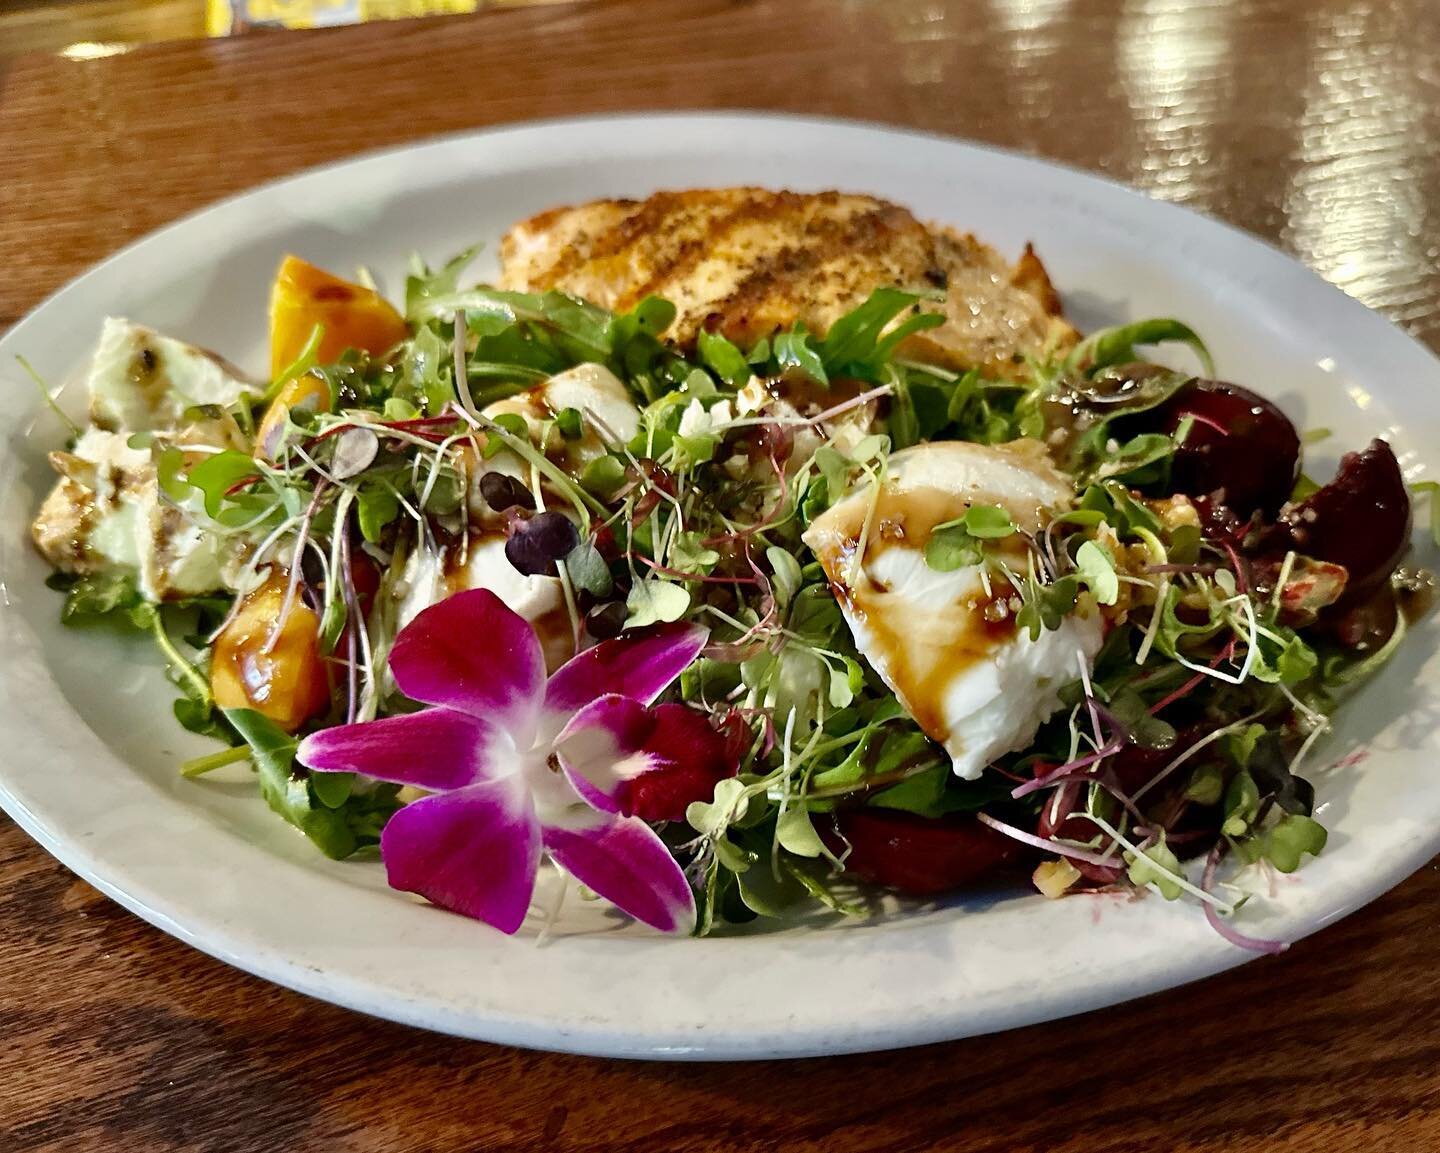 The Beet Salad with burrata was a big hit this past weekend. Someone ordered it with grilled Salmon and it looked so delicious I had to share! ☀️ 

#hamptonbays #hamptons #westhampton #eastend #summerdining #beetsalad